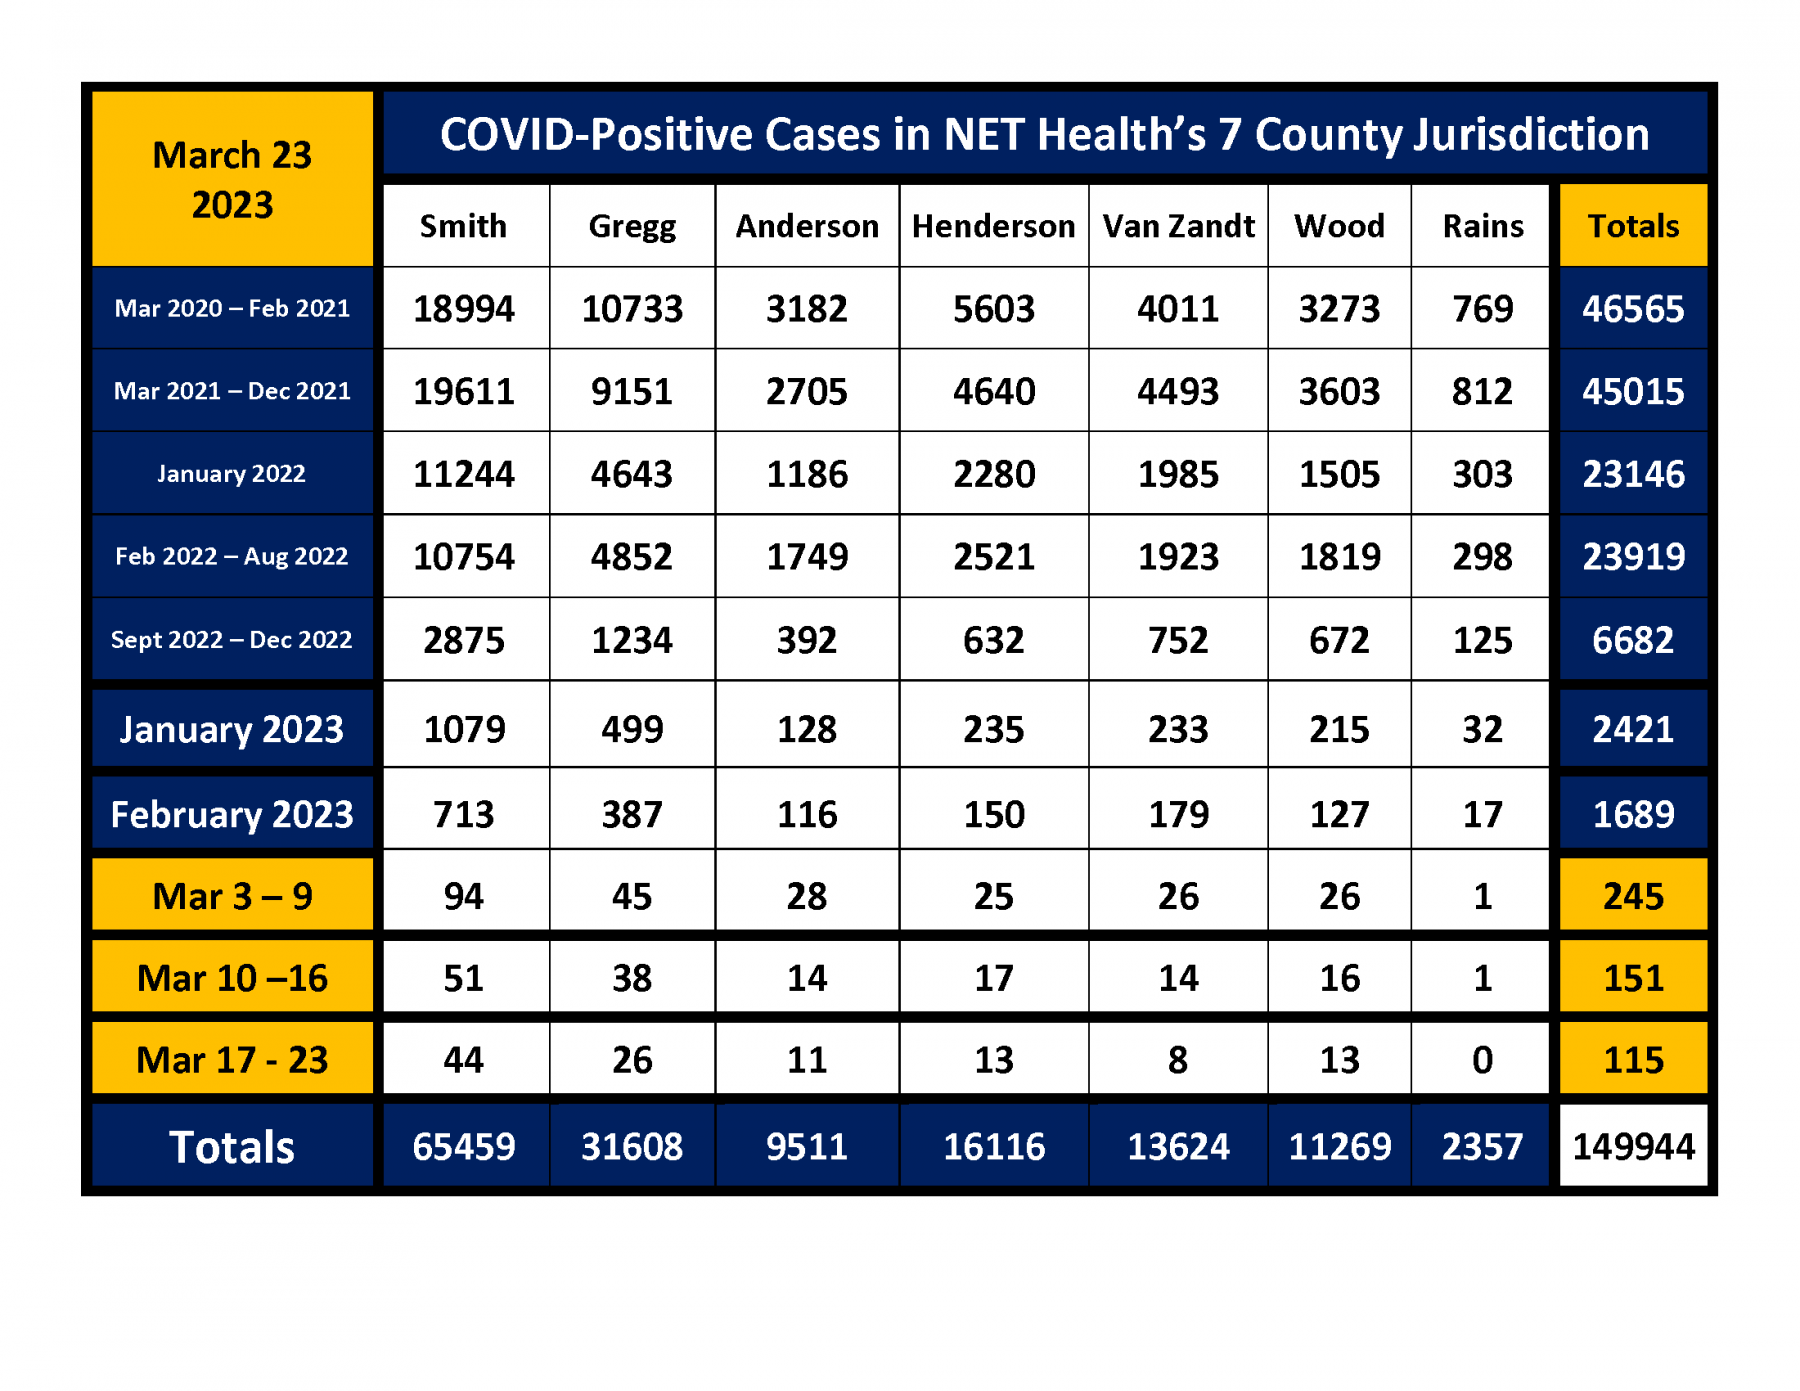 COVID-Positive Cases - updated as of March 2nd 2023